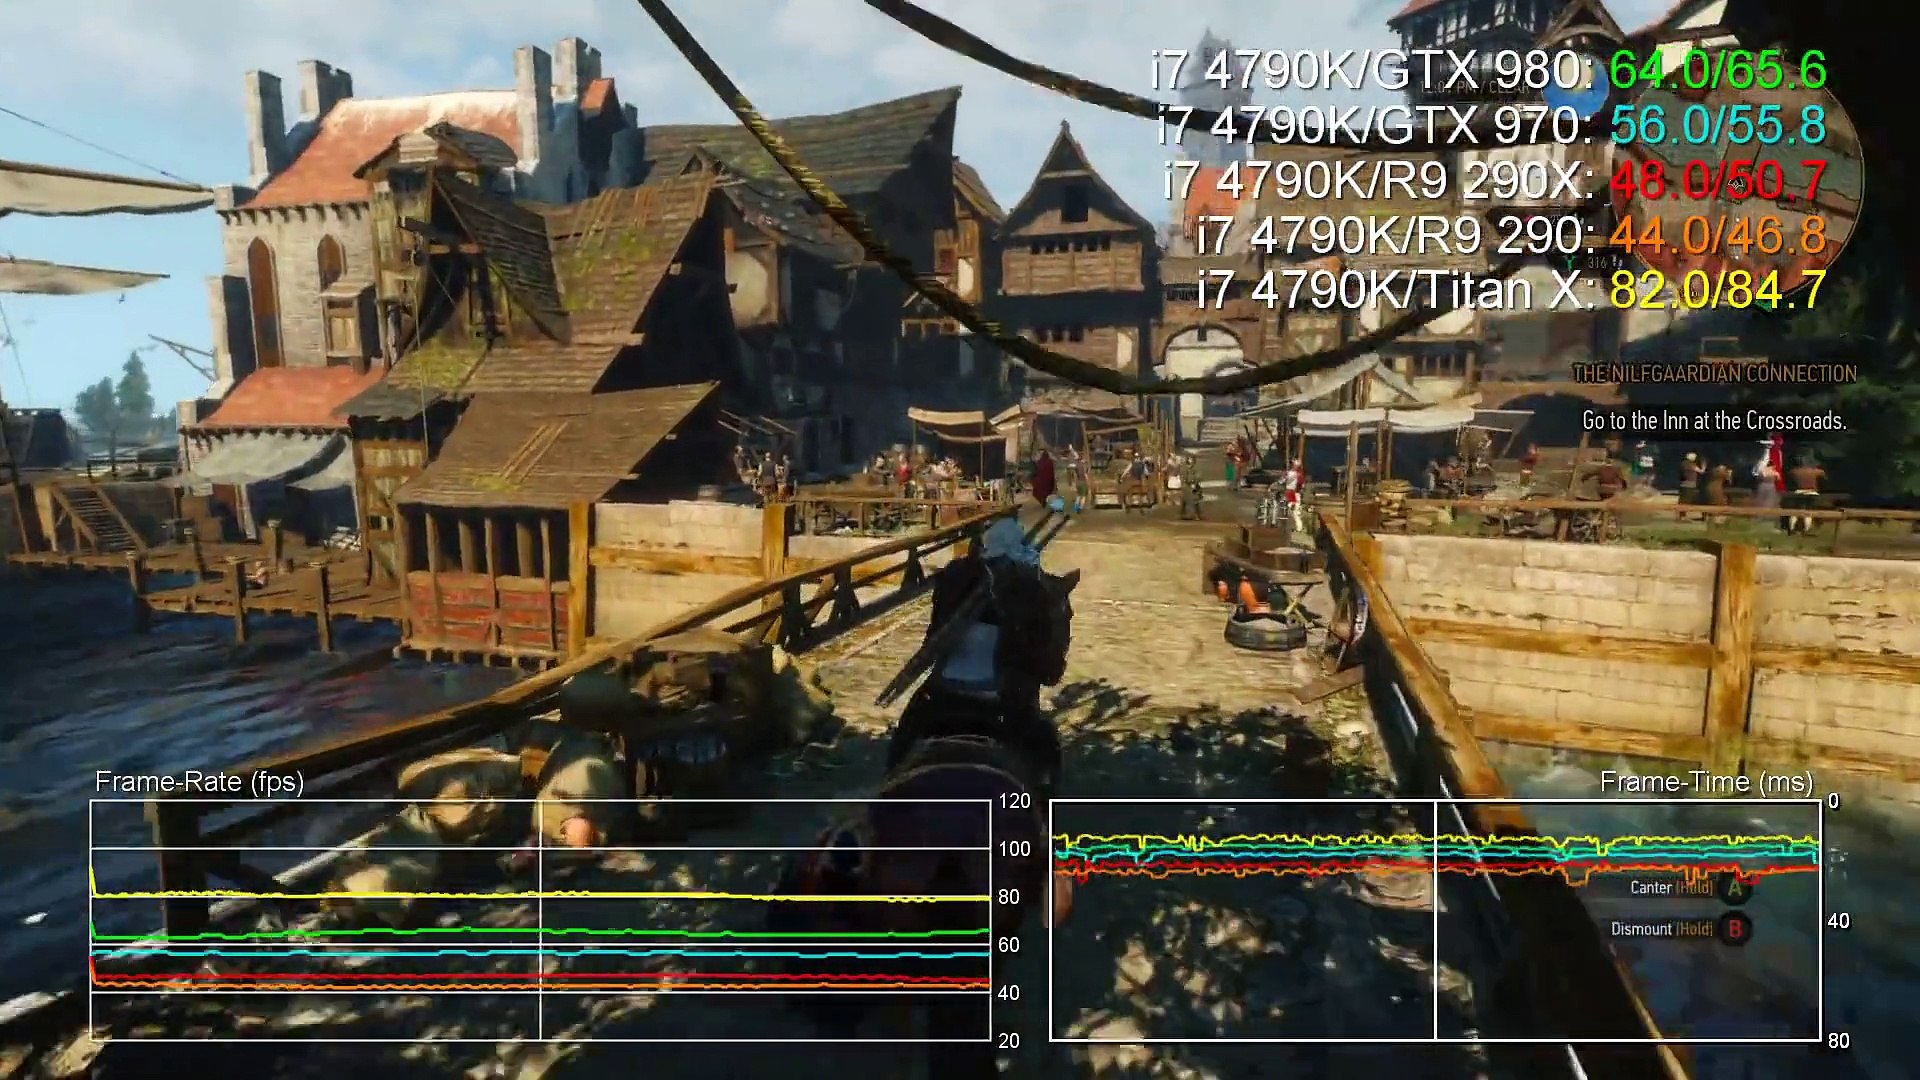 The Witcher 3 GTX 970/980/Titan X vs R9 290/290X Benchmark Frame-Rate Tests  - Video Dailymotion